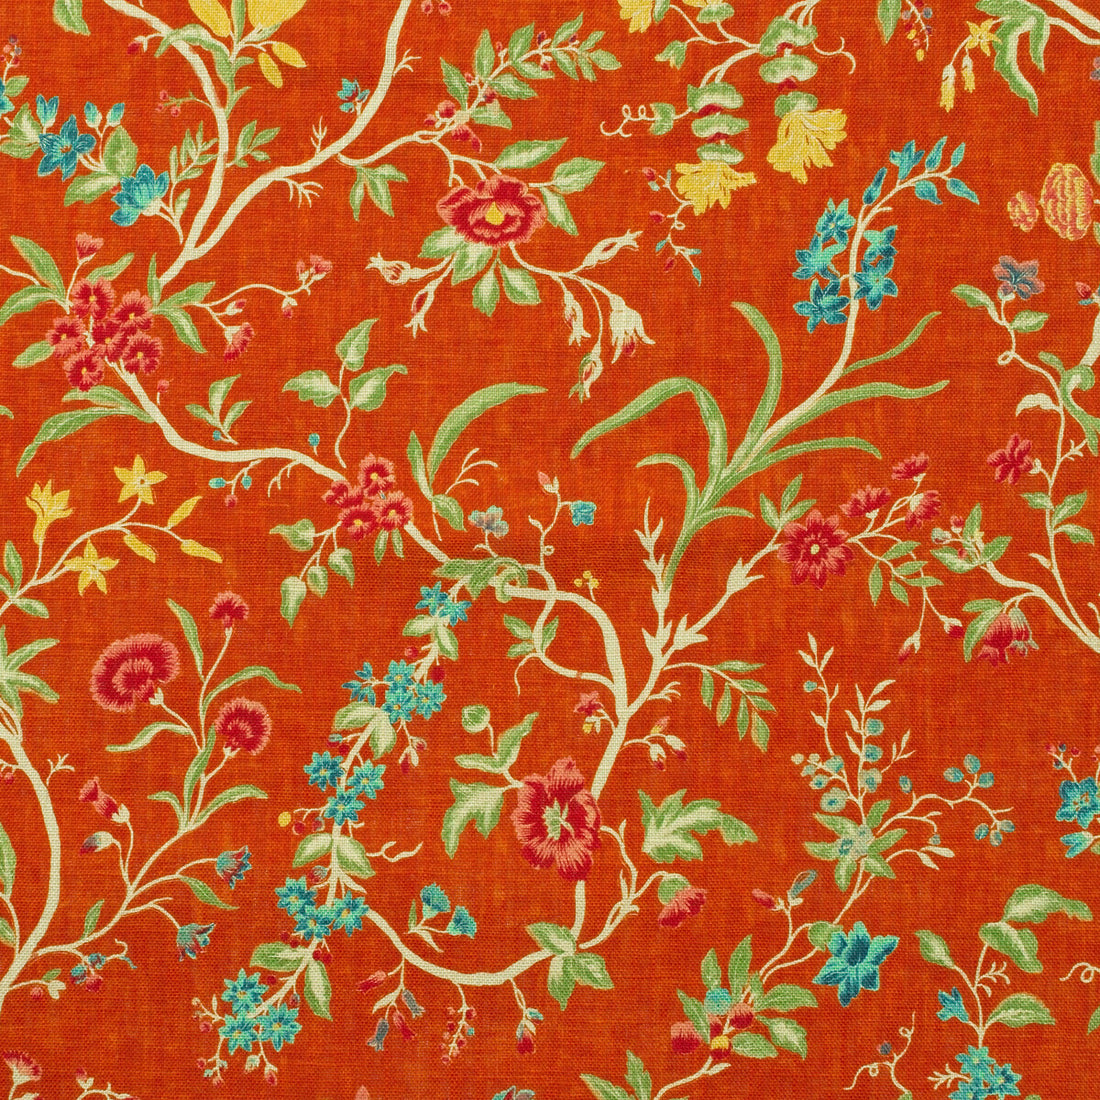 Ramble fabric in pumpkin color - pattern AM100409.12.0 - by Kravet Couture in the Andrew Martin The Secret Garden collection